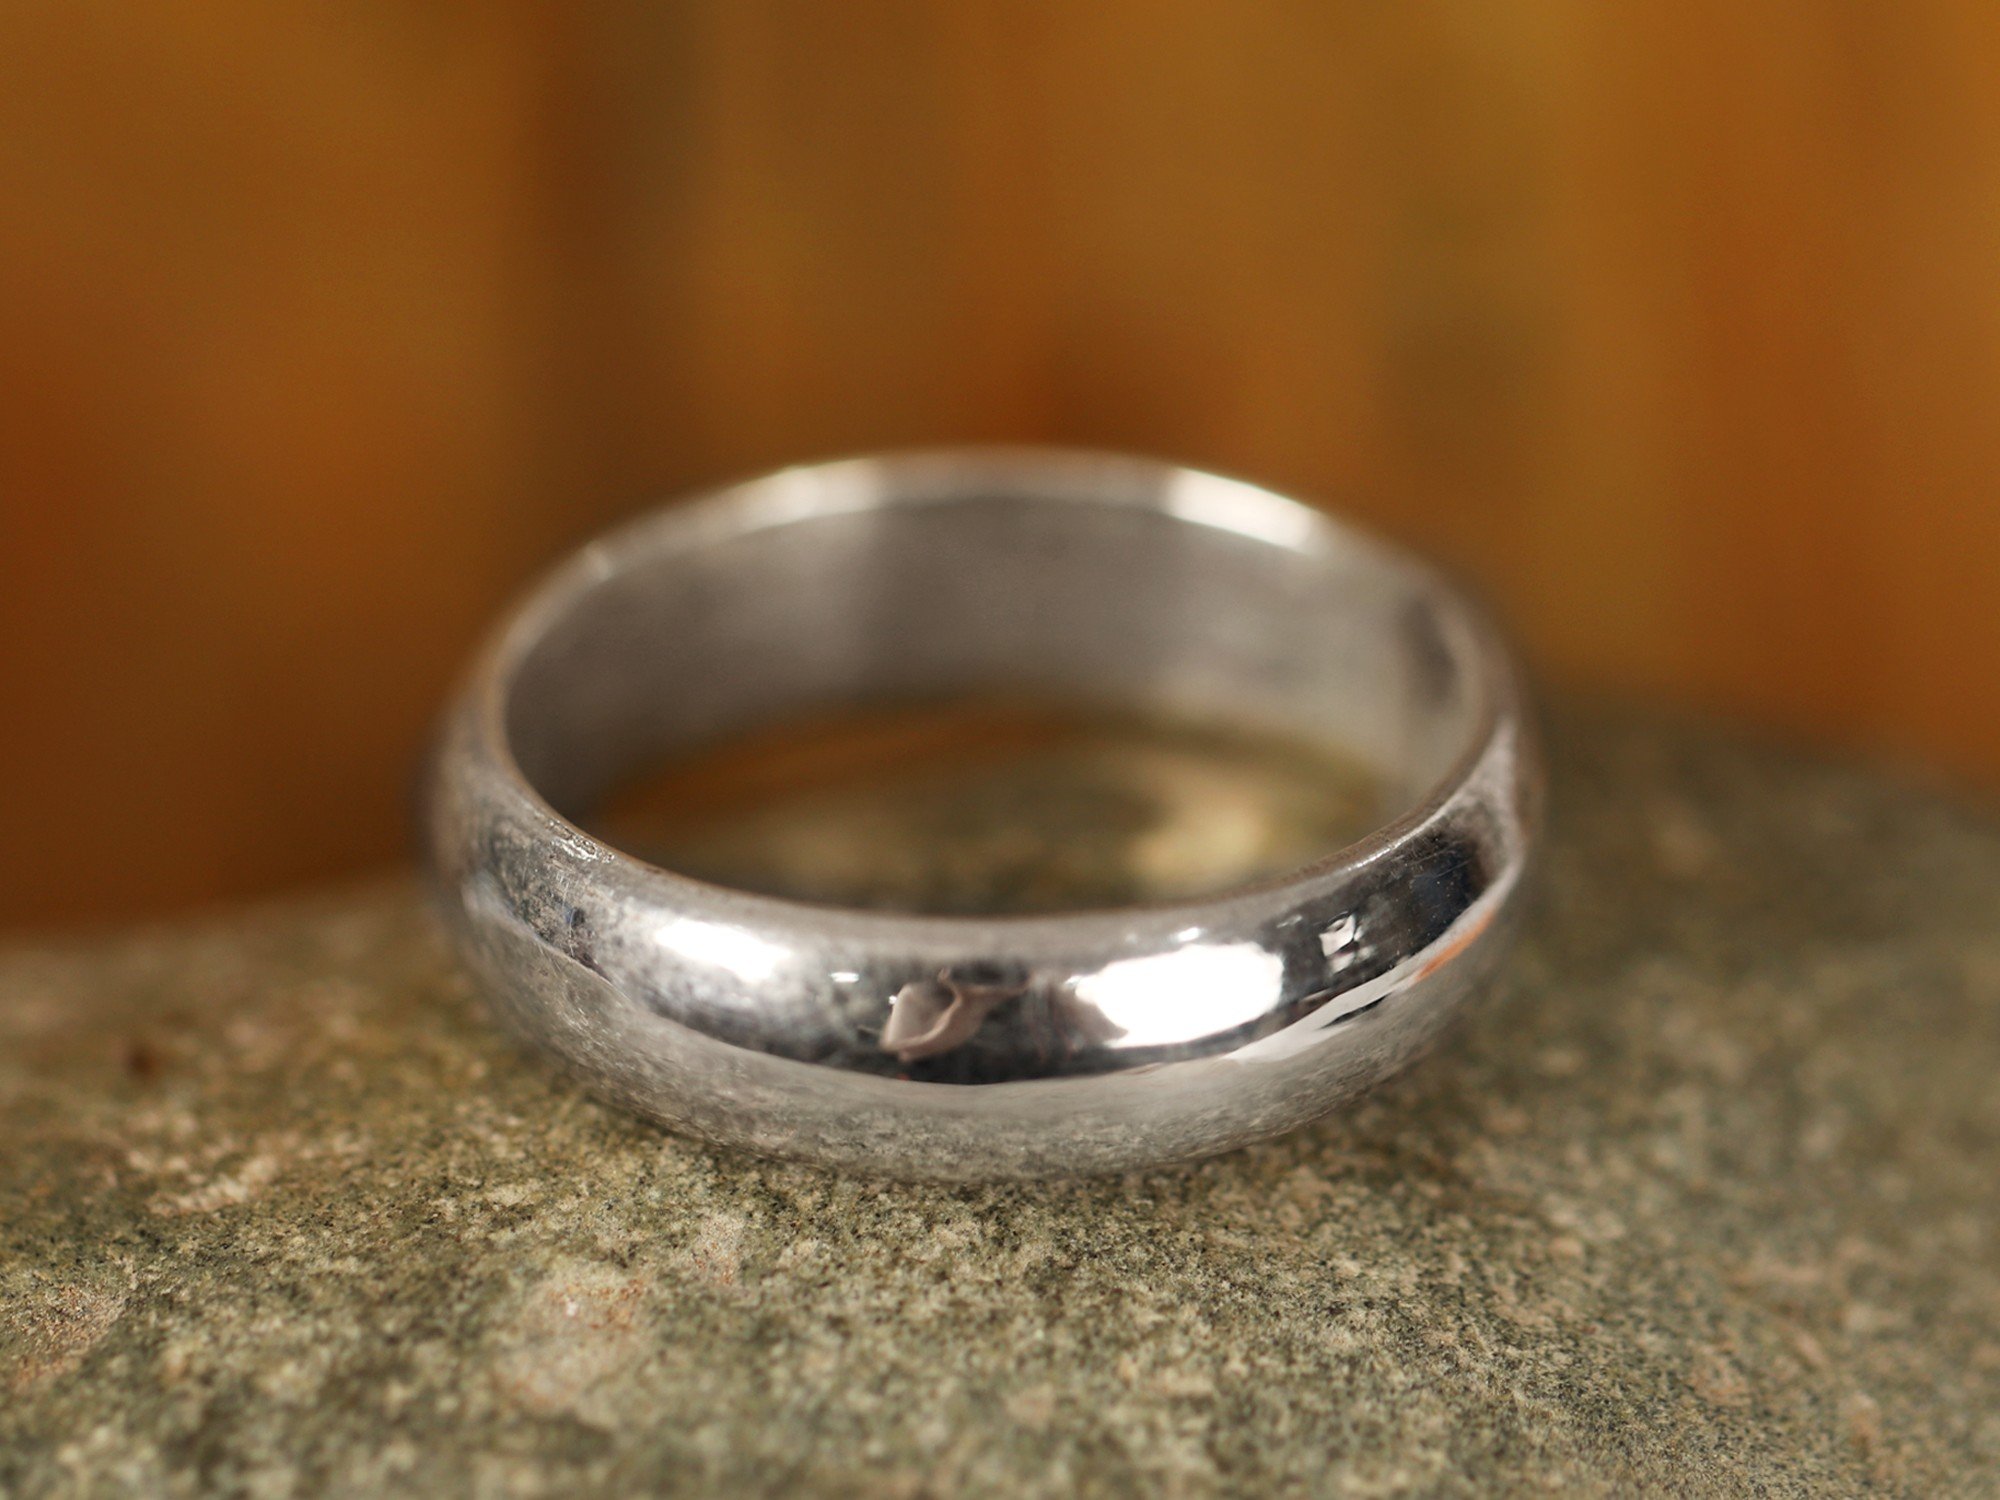 Bling Jewelry Sterling Silver Flat Wedding Band Ring Unisex 4mm Grey  5|Amazon.com